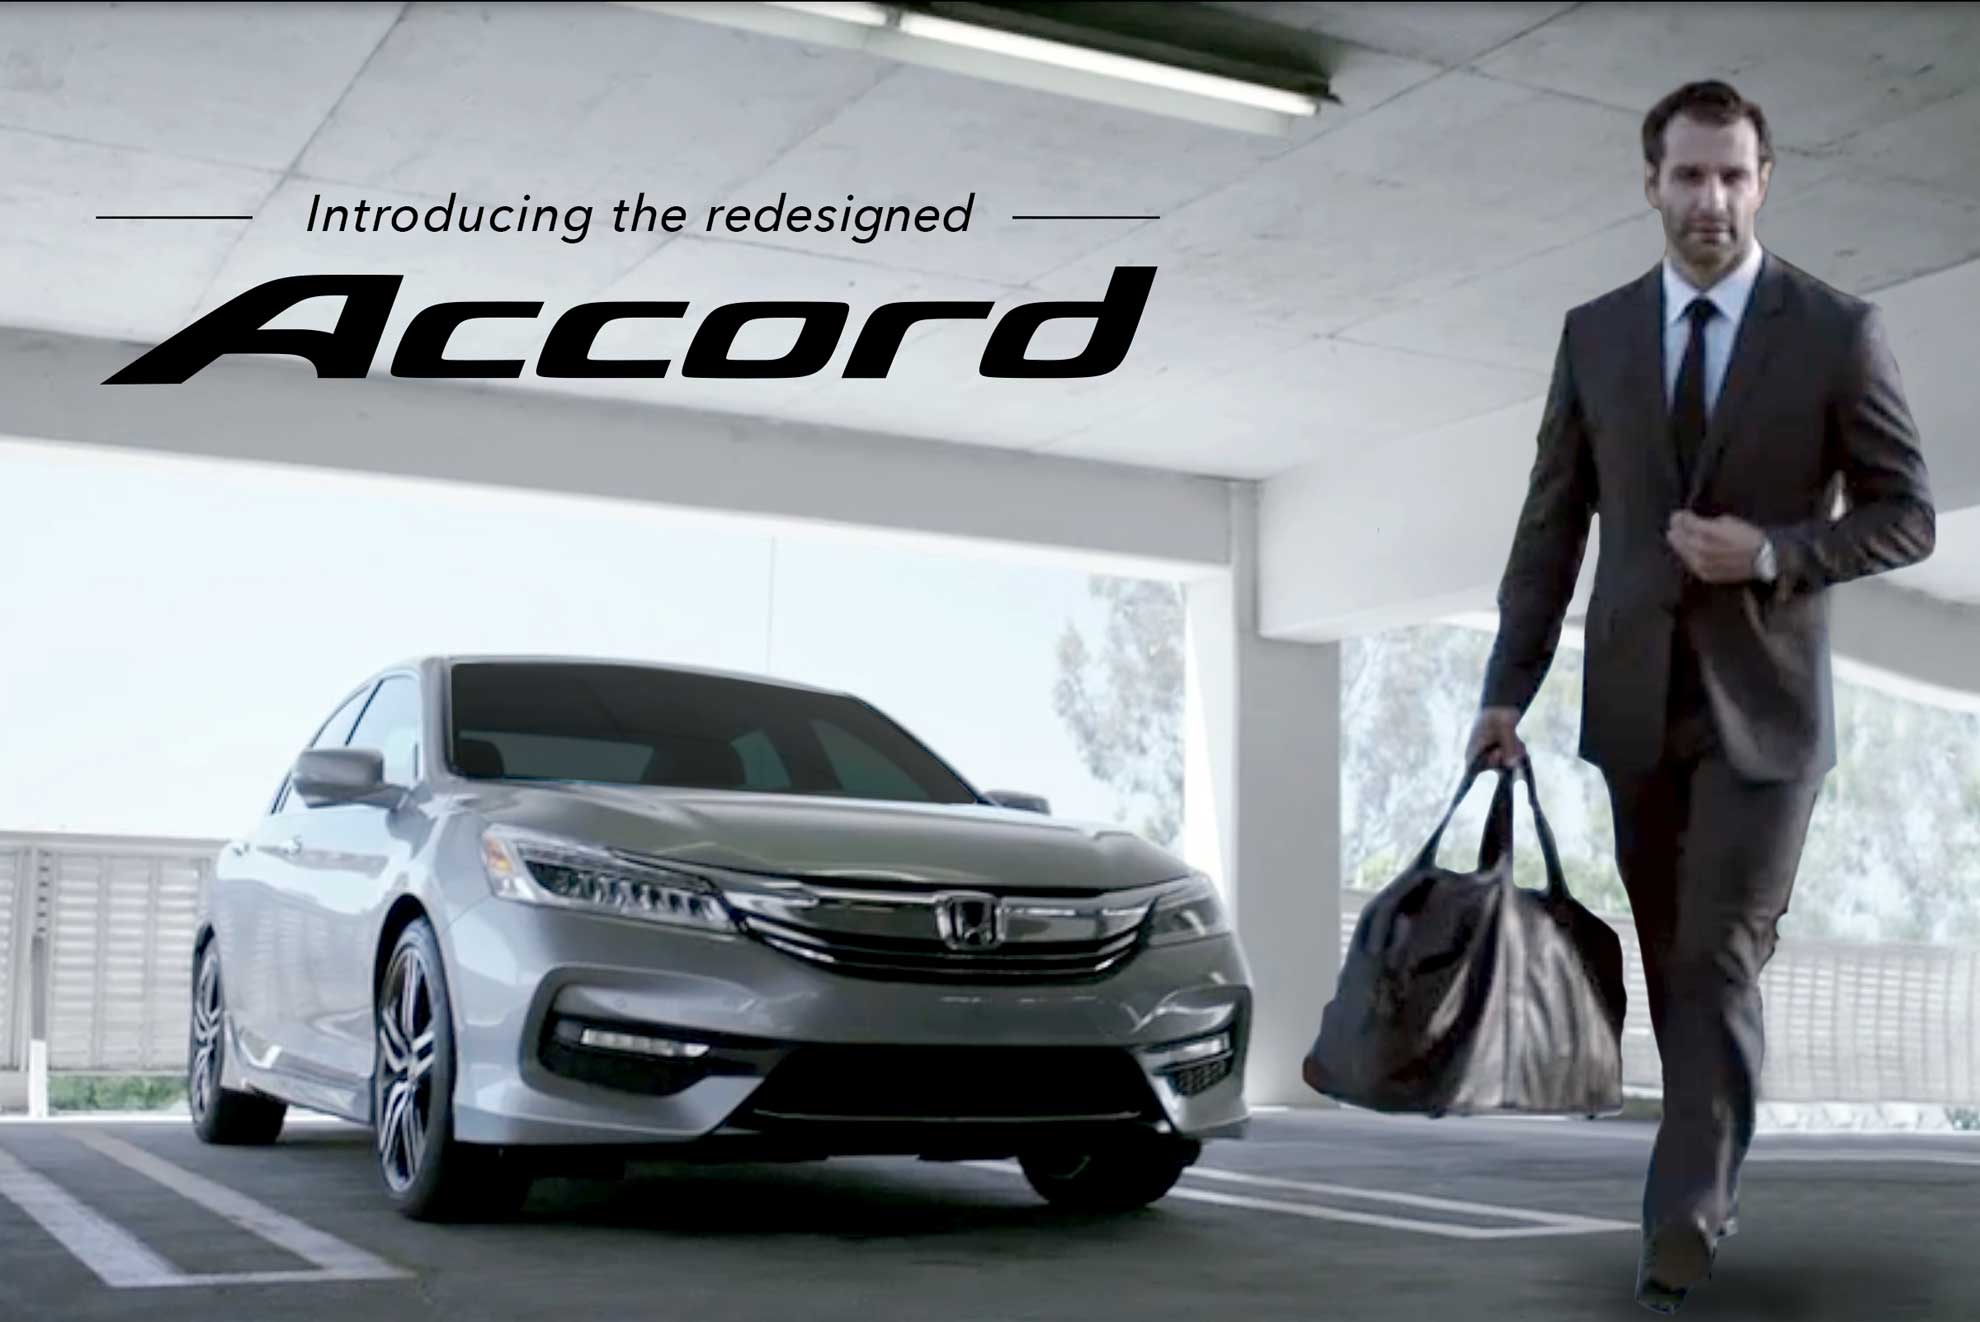 Introducing the Redesigned Accord